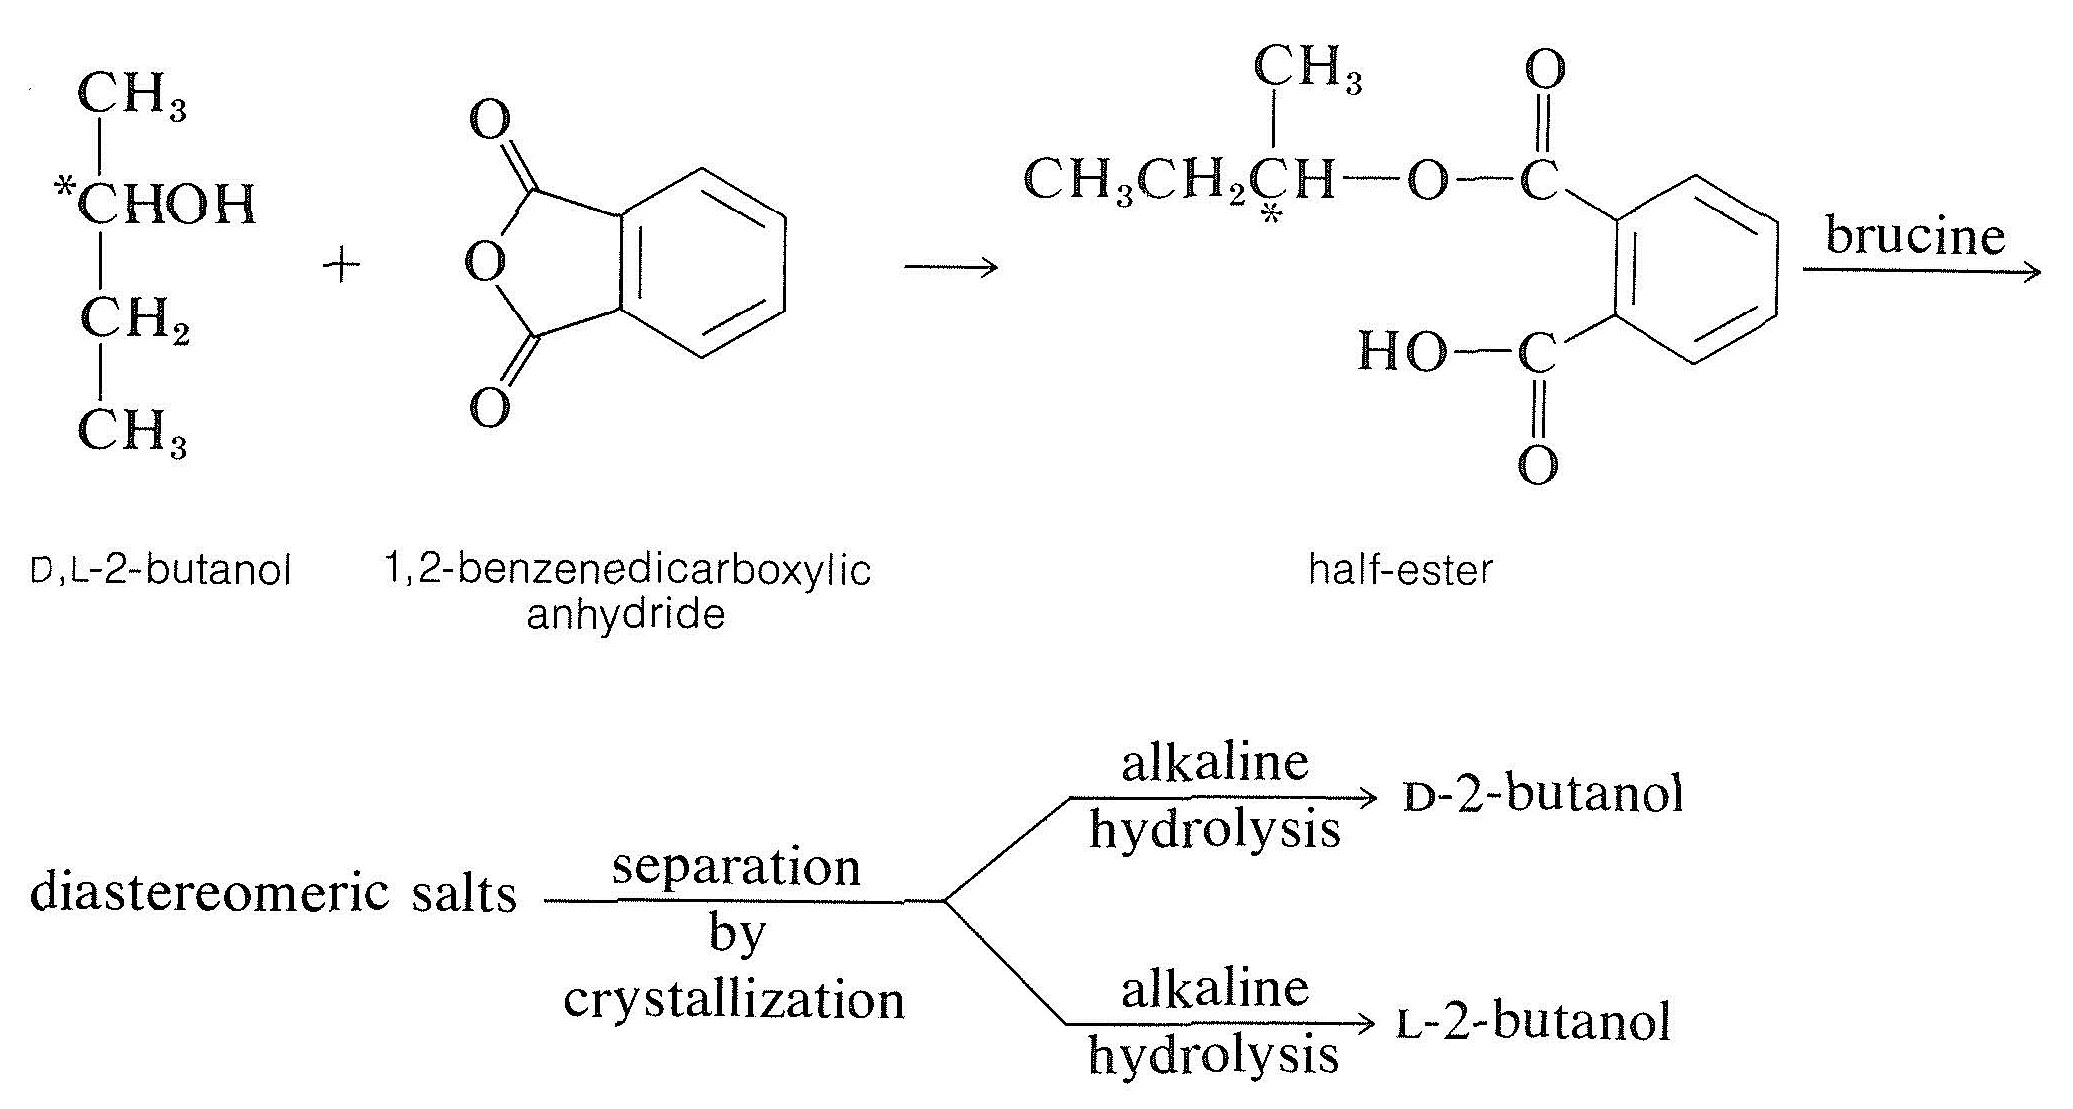 D,L,-2-butanol reacts with 1,2-benzenedicarboxylic anhydride to produce half- ester which reacts with brucine to get diasteromeric salts which are separated by crystallization and undergoes hydrolysis to produce D-2-butanol and l-2-butanol.  